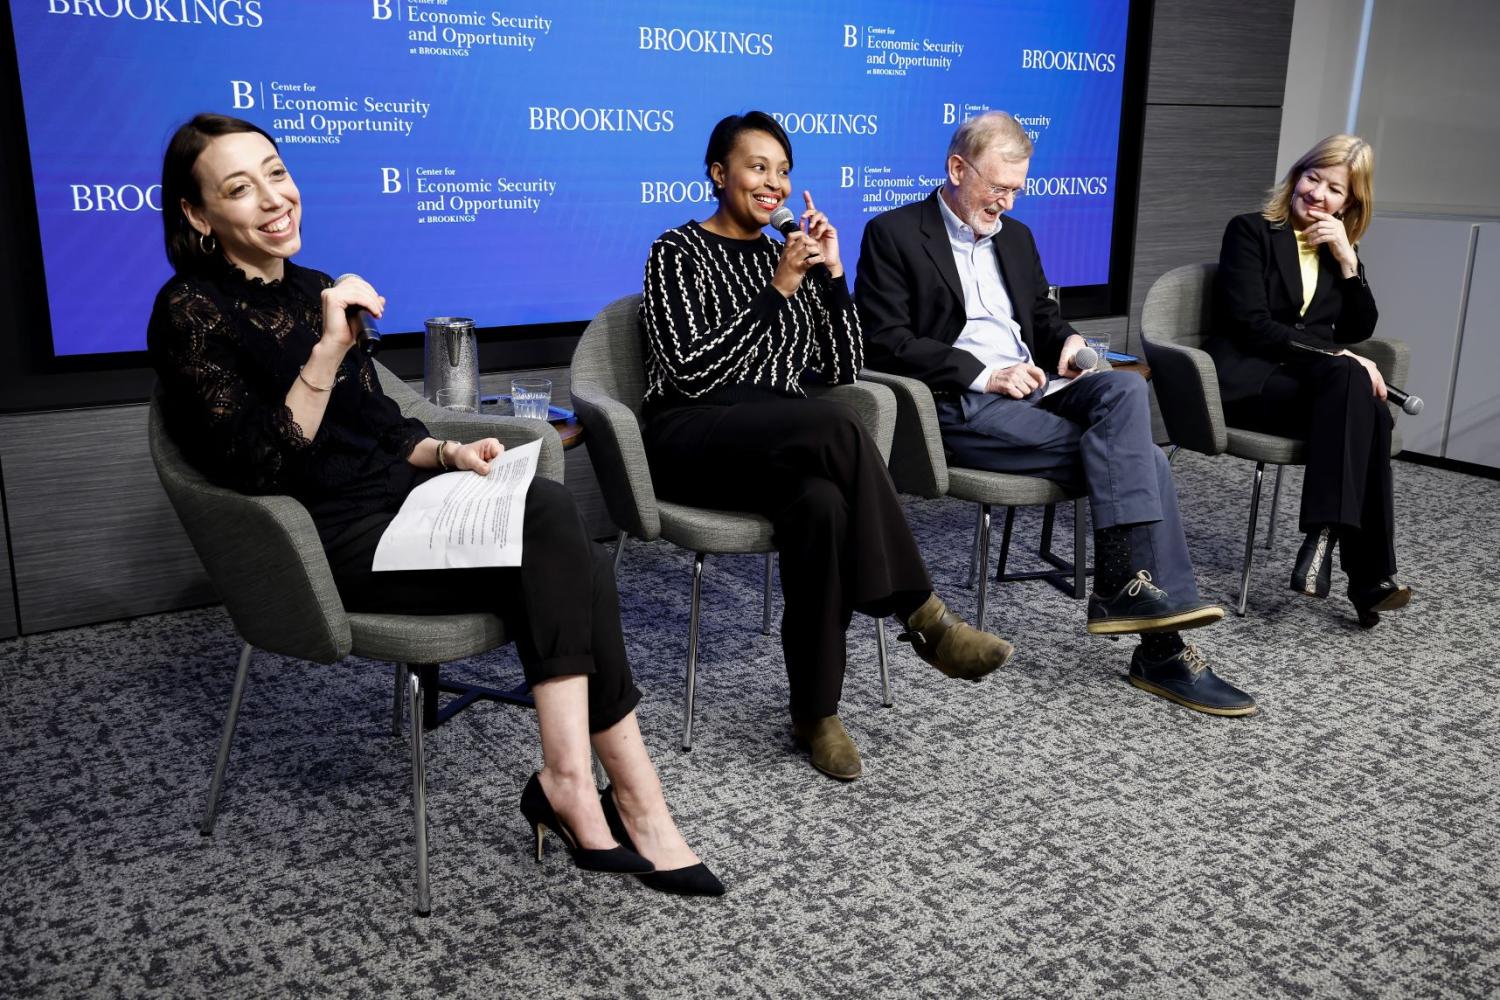 Moderator and three panelists, all seated, participating in a discussion